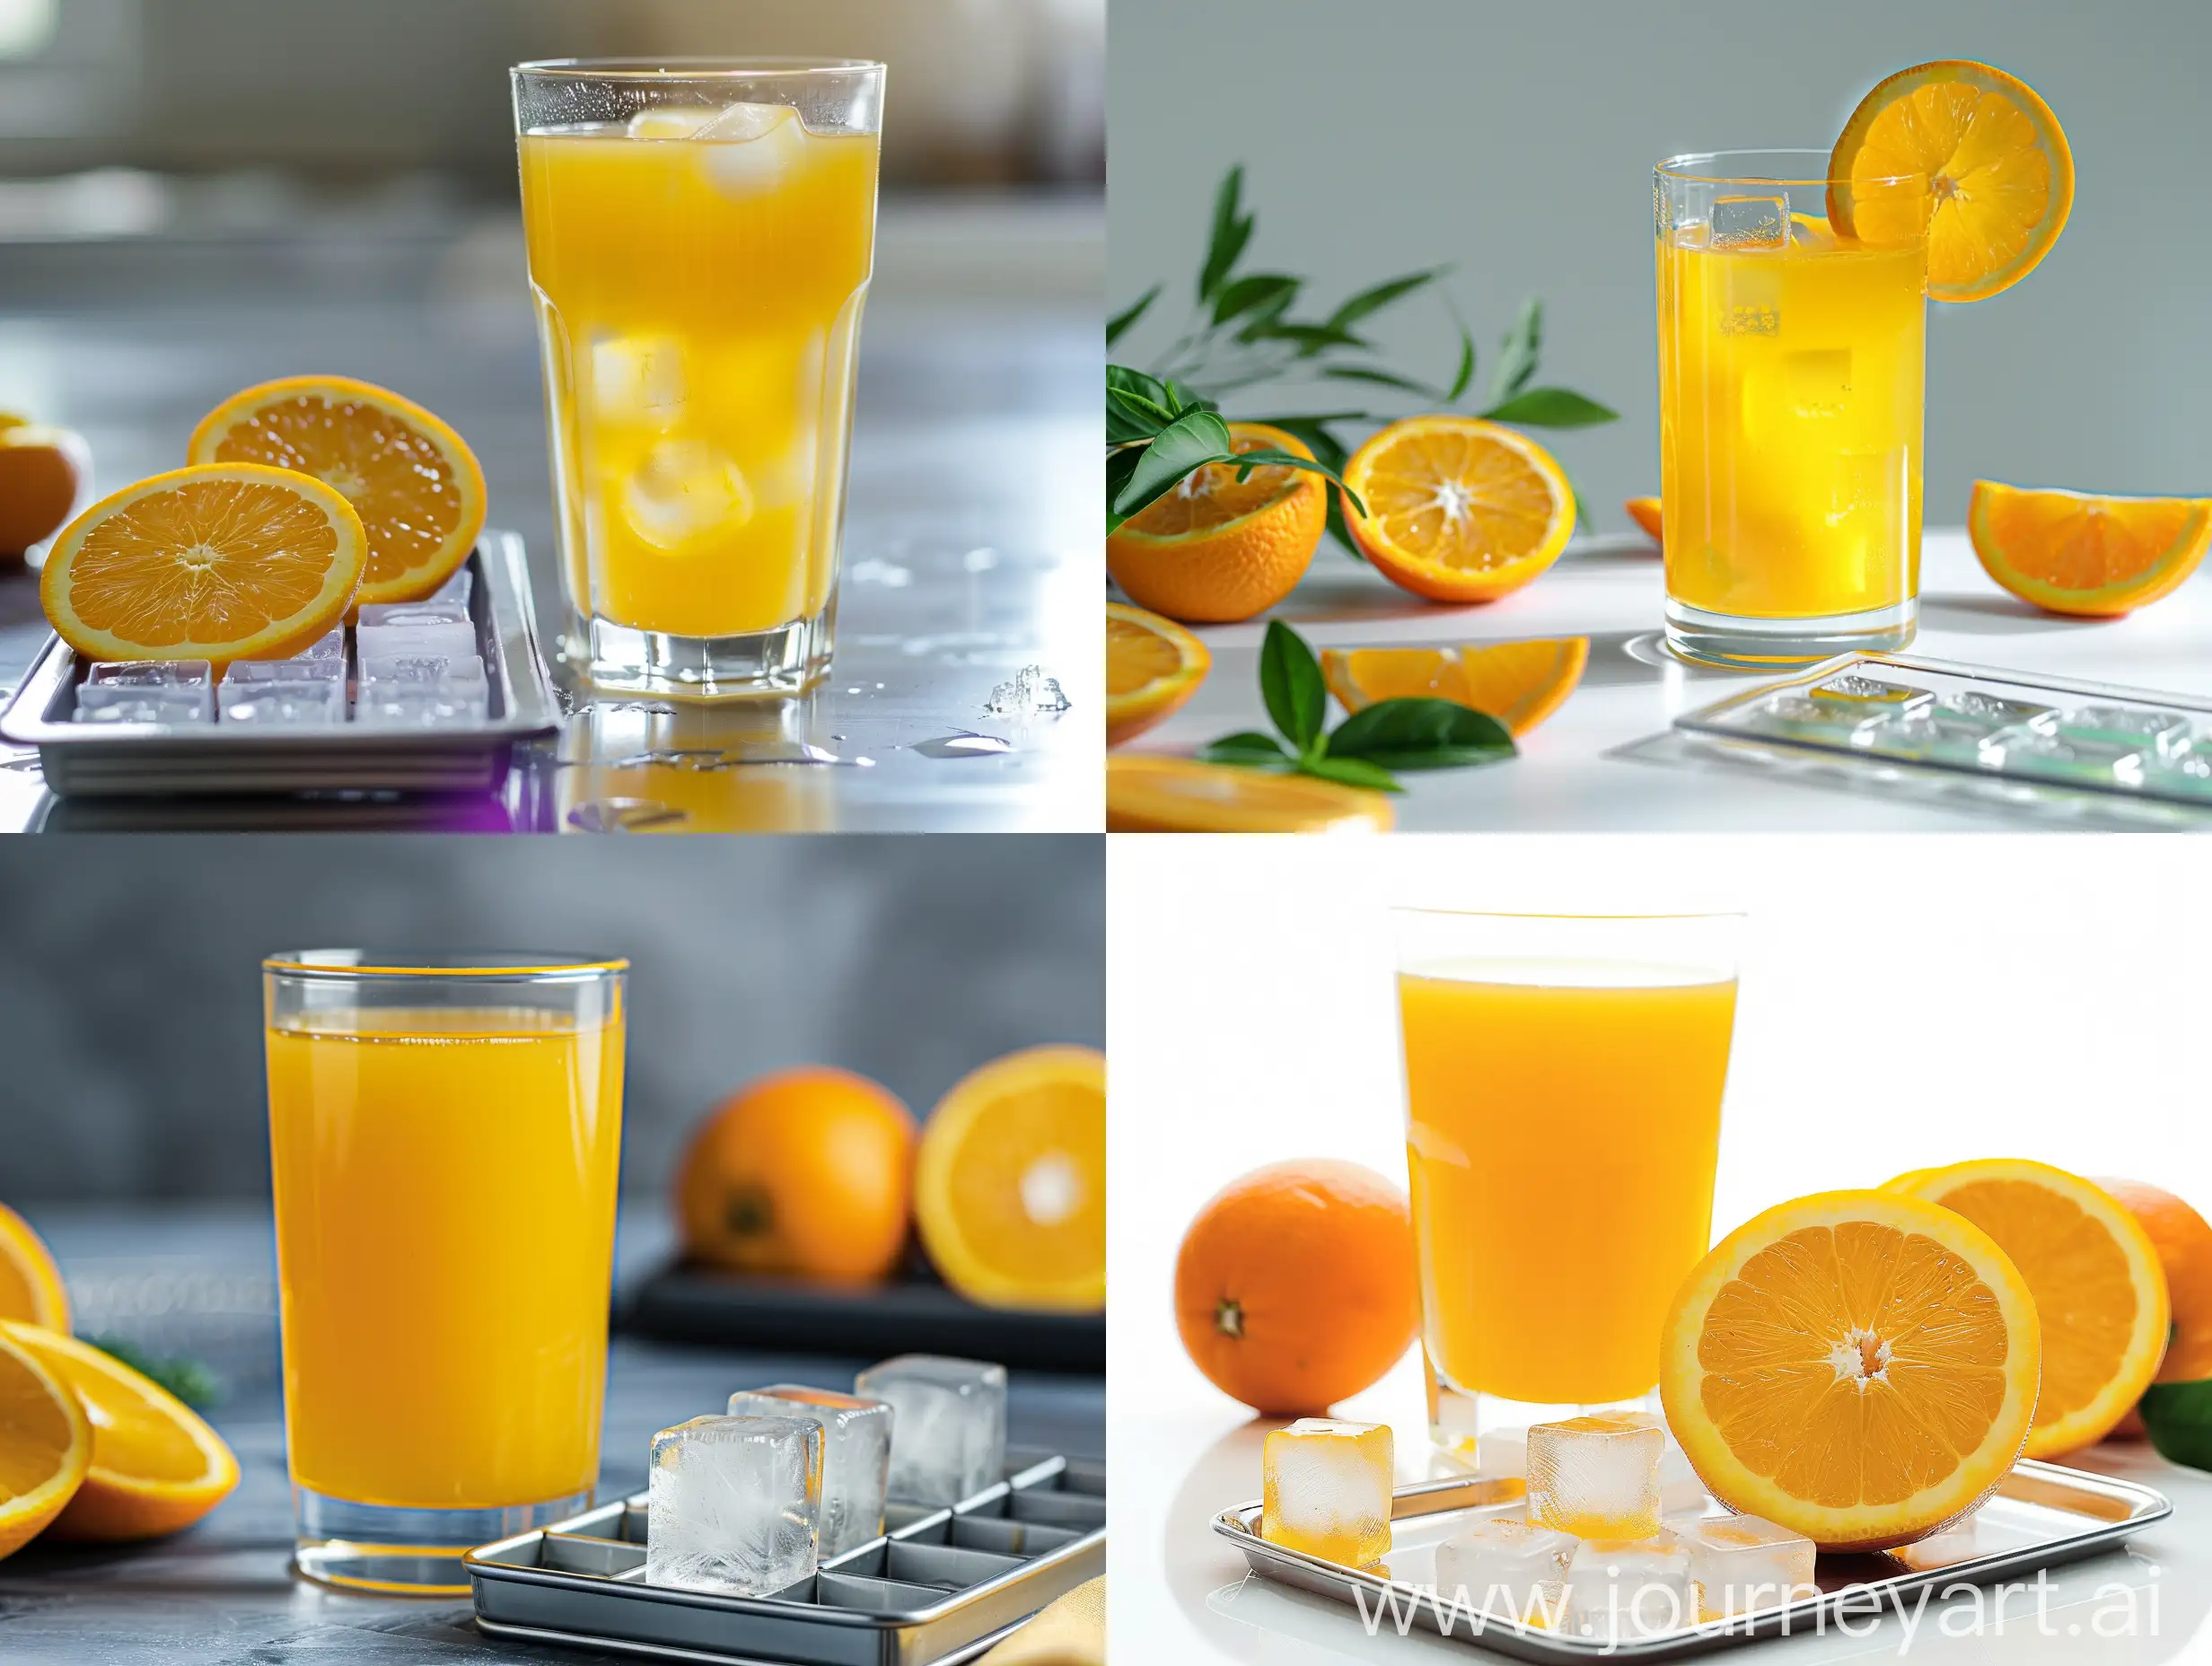 Studio shot of a glass of orange juice with an ice cube tray